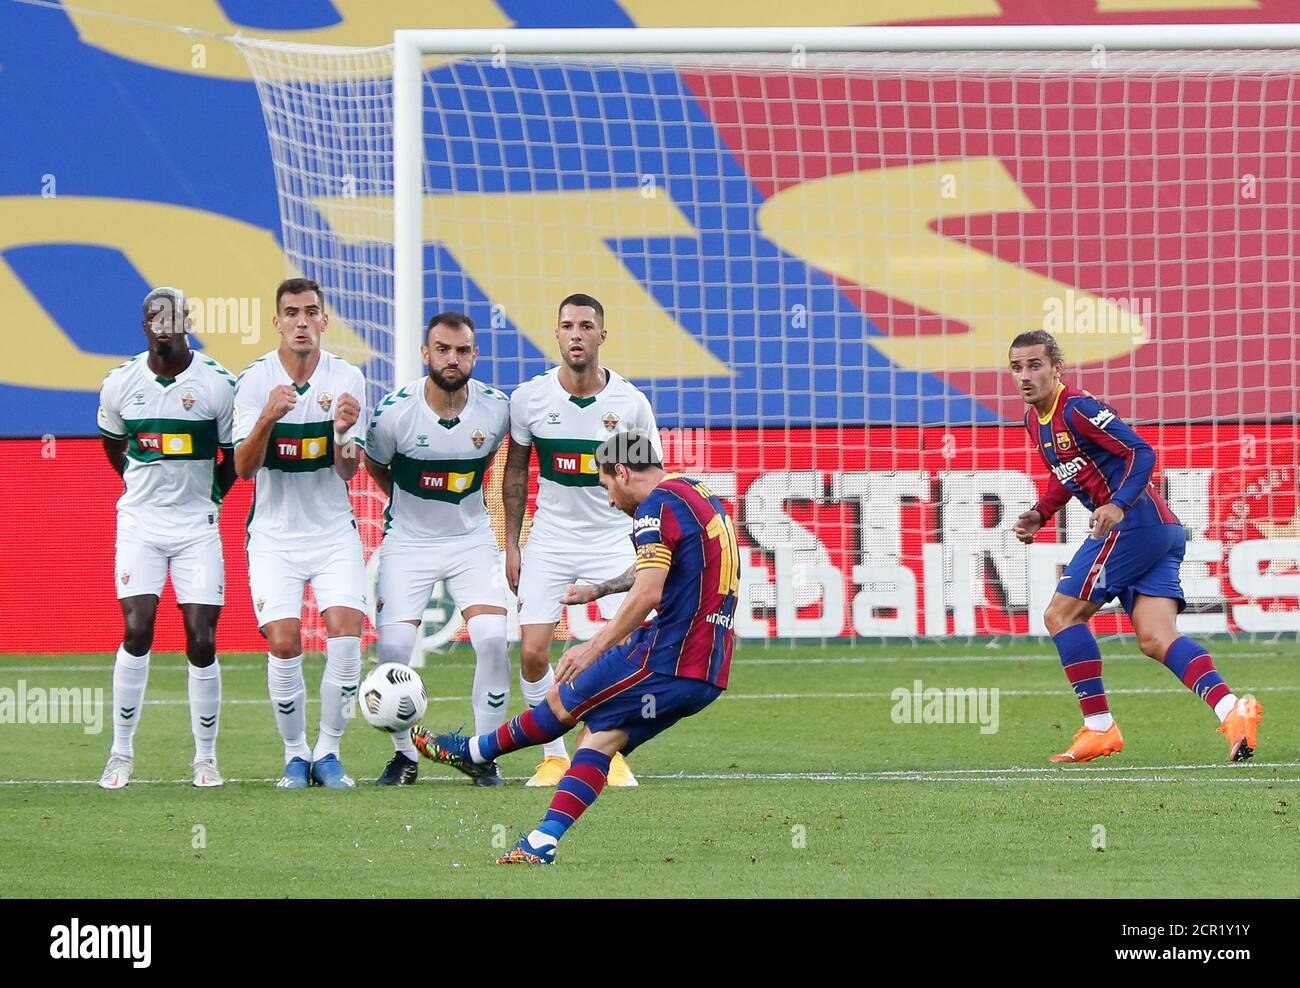 Barcelona, Barcelona, Spain. 19th Sep, 2020. Messi of FC Barcelona in action during the Gamper Trophy match between FC Barcelona and Elche at Camp Nou on September 19, 2020 in Barcelona, Spain. Credit: David Ramirez/DAX/ZUMA Wire/Alamy Live News Stock Photo